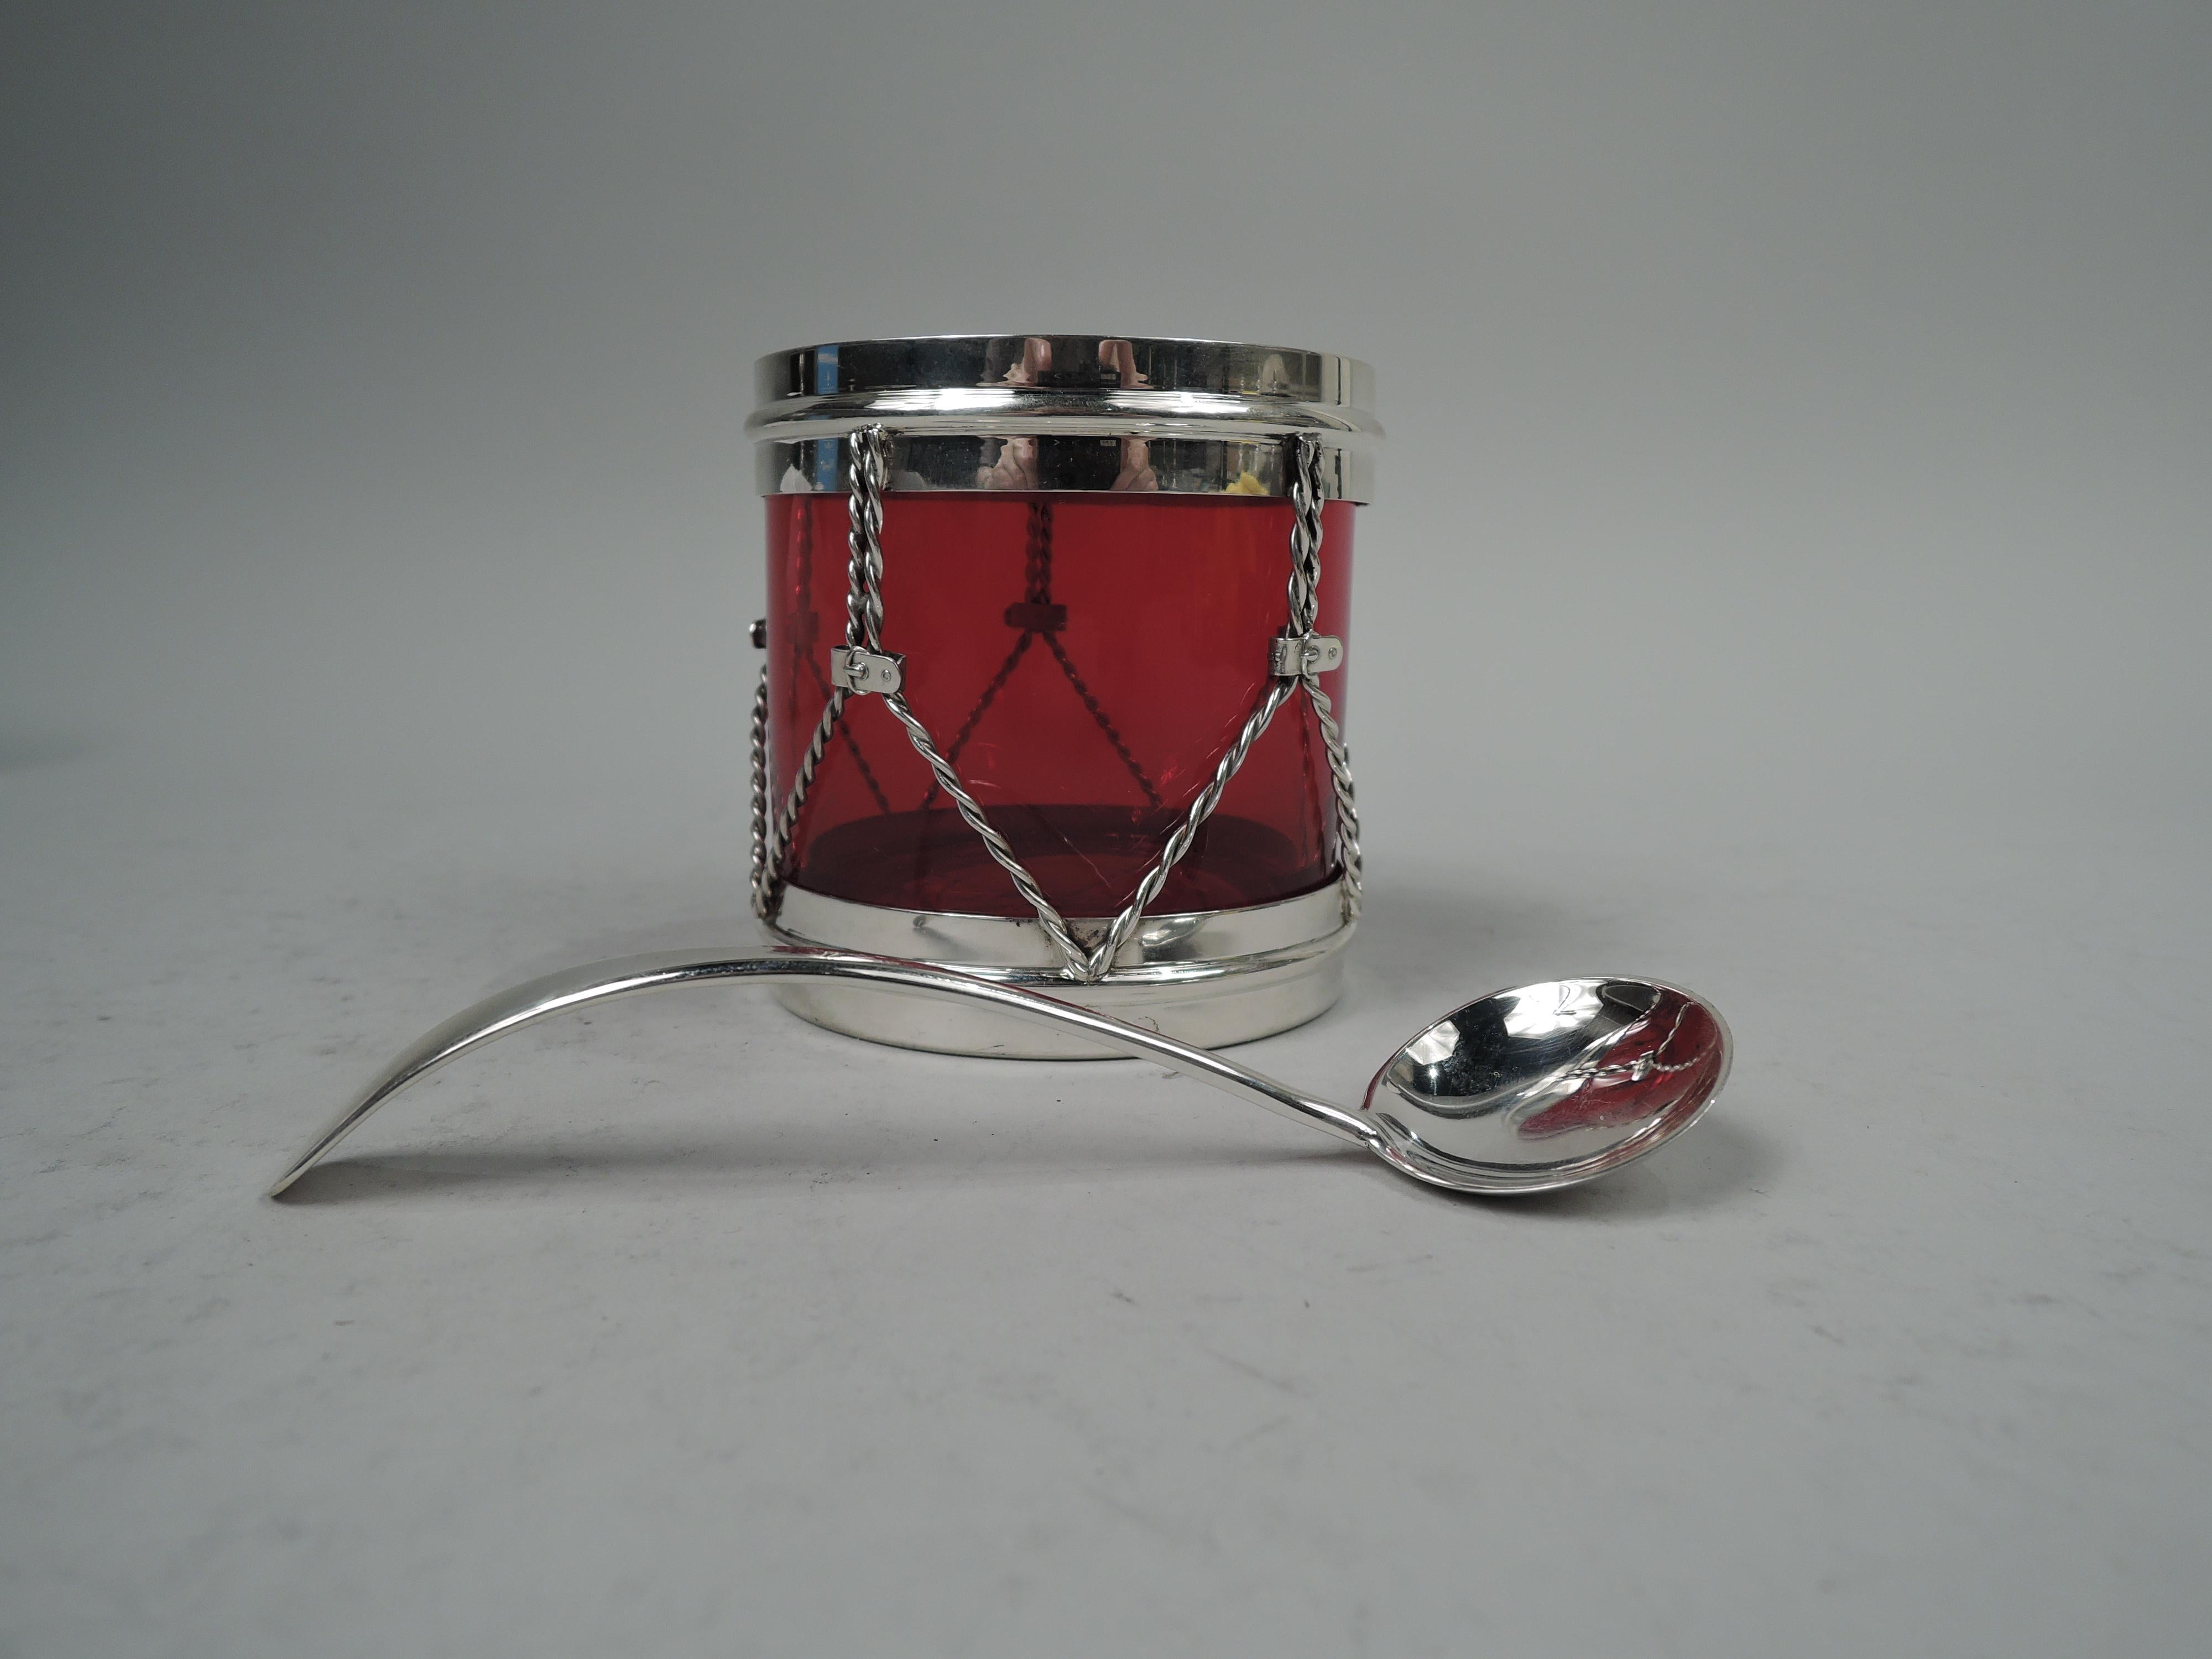 Midcentury Modern sterling silver novelty and glass jam jar with spoon. Made by R. Blackinton & Co. in North Attleboro, Mass. Glass body with sterling silver hoops and cords. Inset cover with crossed drumsticks finial. Glass is red. Spoon has